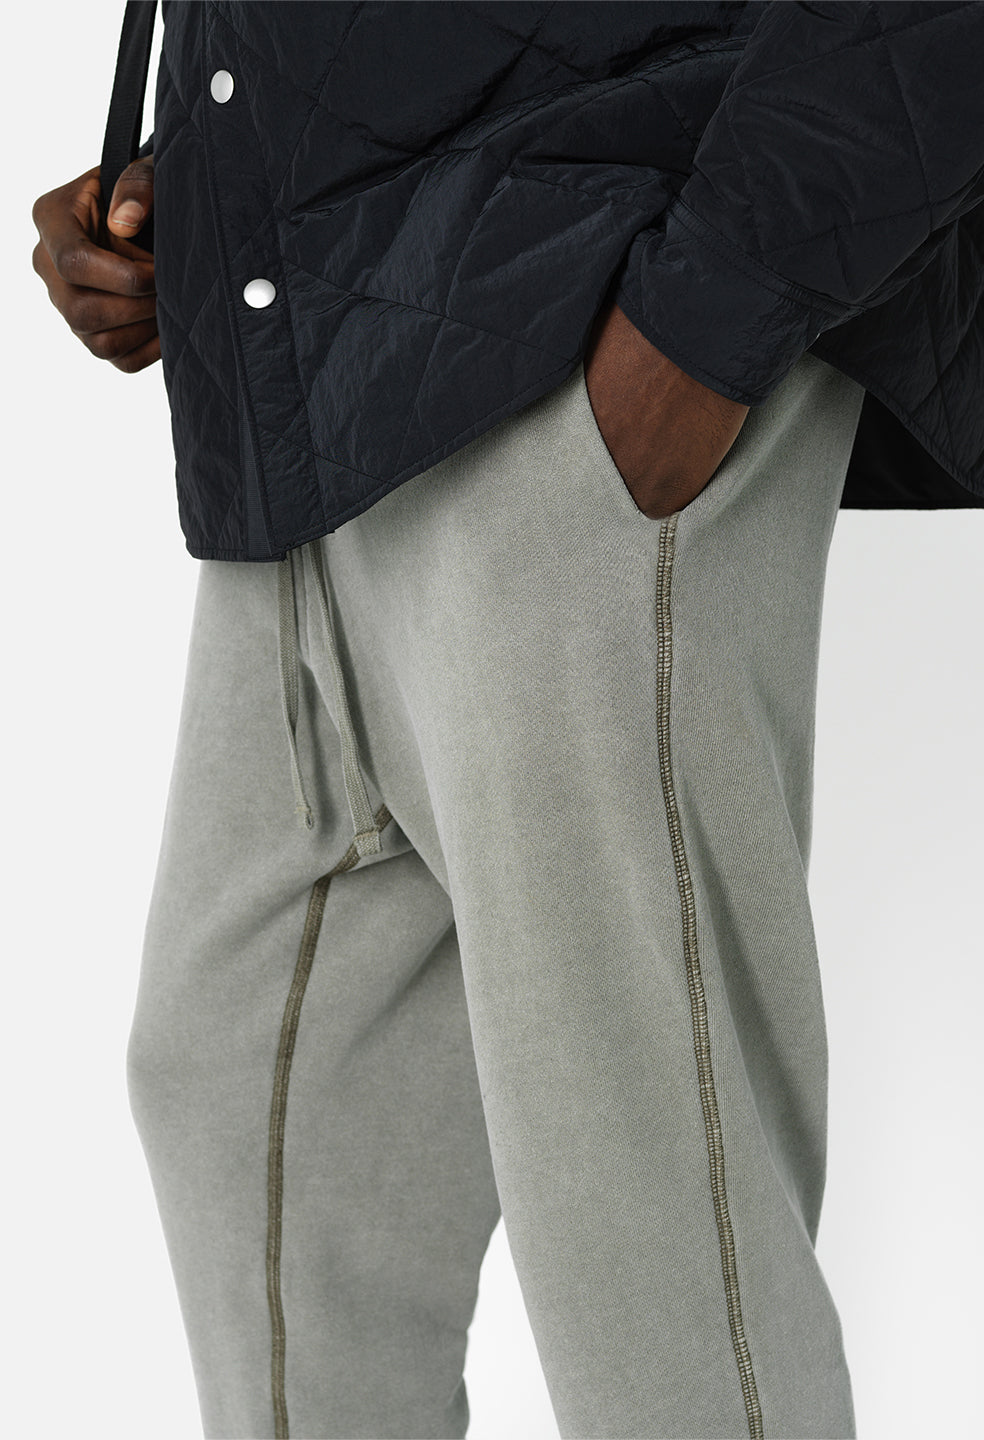 Lined Sweatpants Olive Washed LA / Thermal